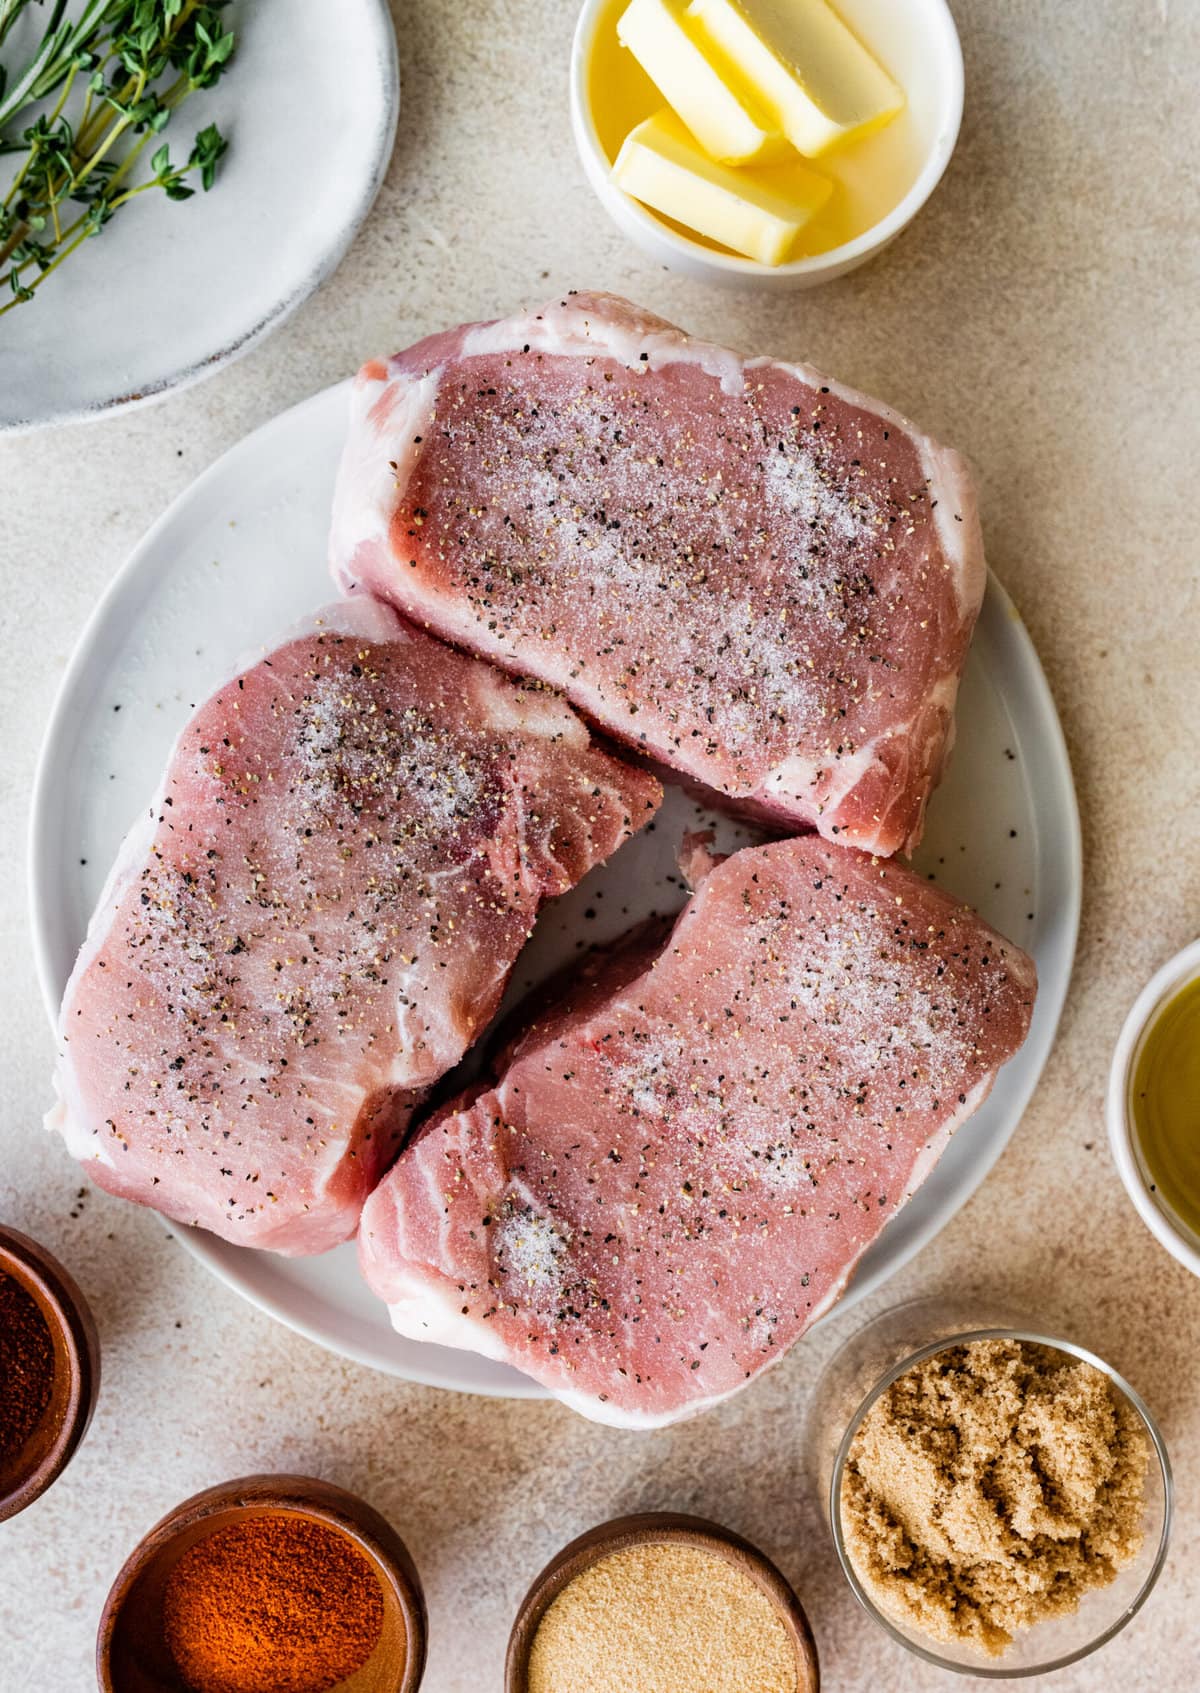 Step-by-step photos for How to cook thick pork chops- season both sides of the pork chops with salt and pepper.